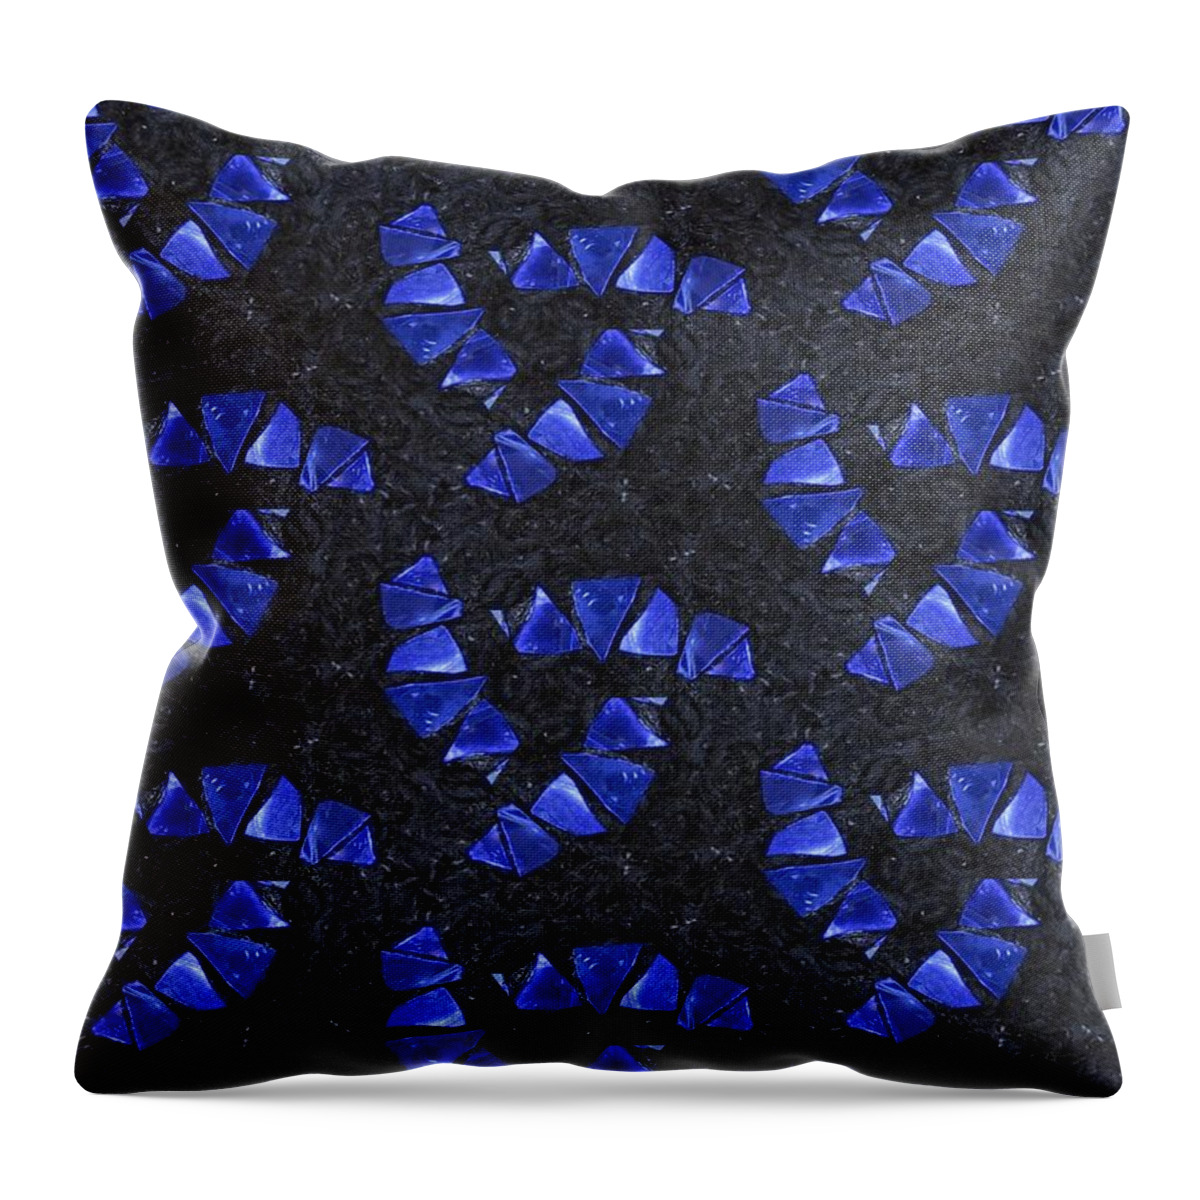 Acrylics Throw Pillow featuring the mixed media Blue Glass by Maria Watt